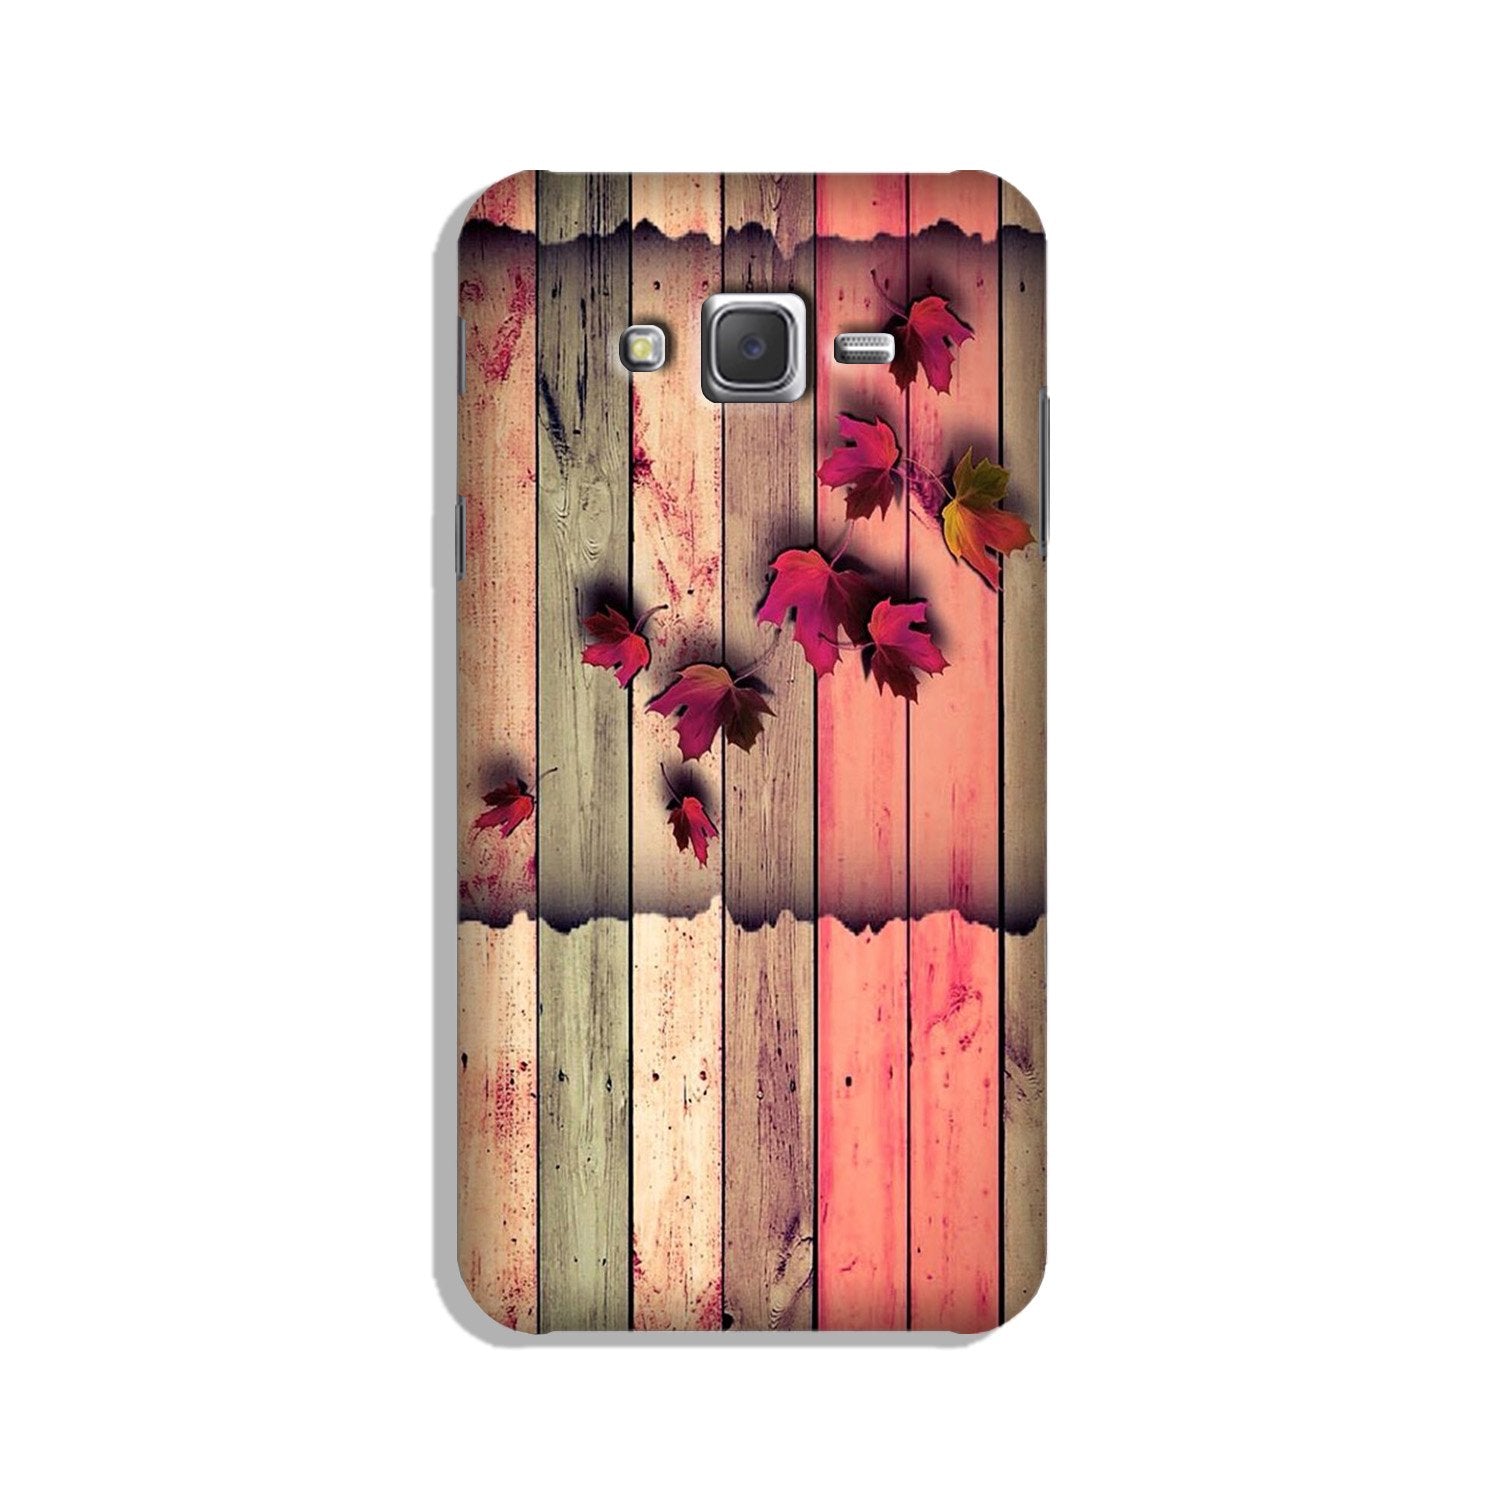 Wooden look2 Case for Galaxy J7 (2015)